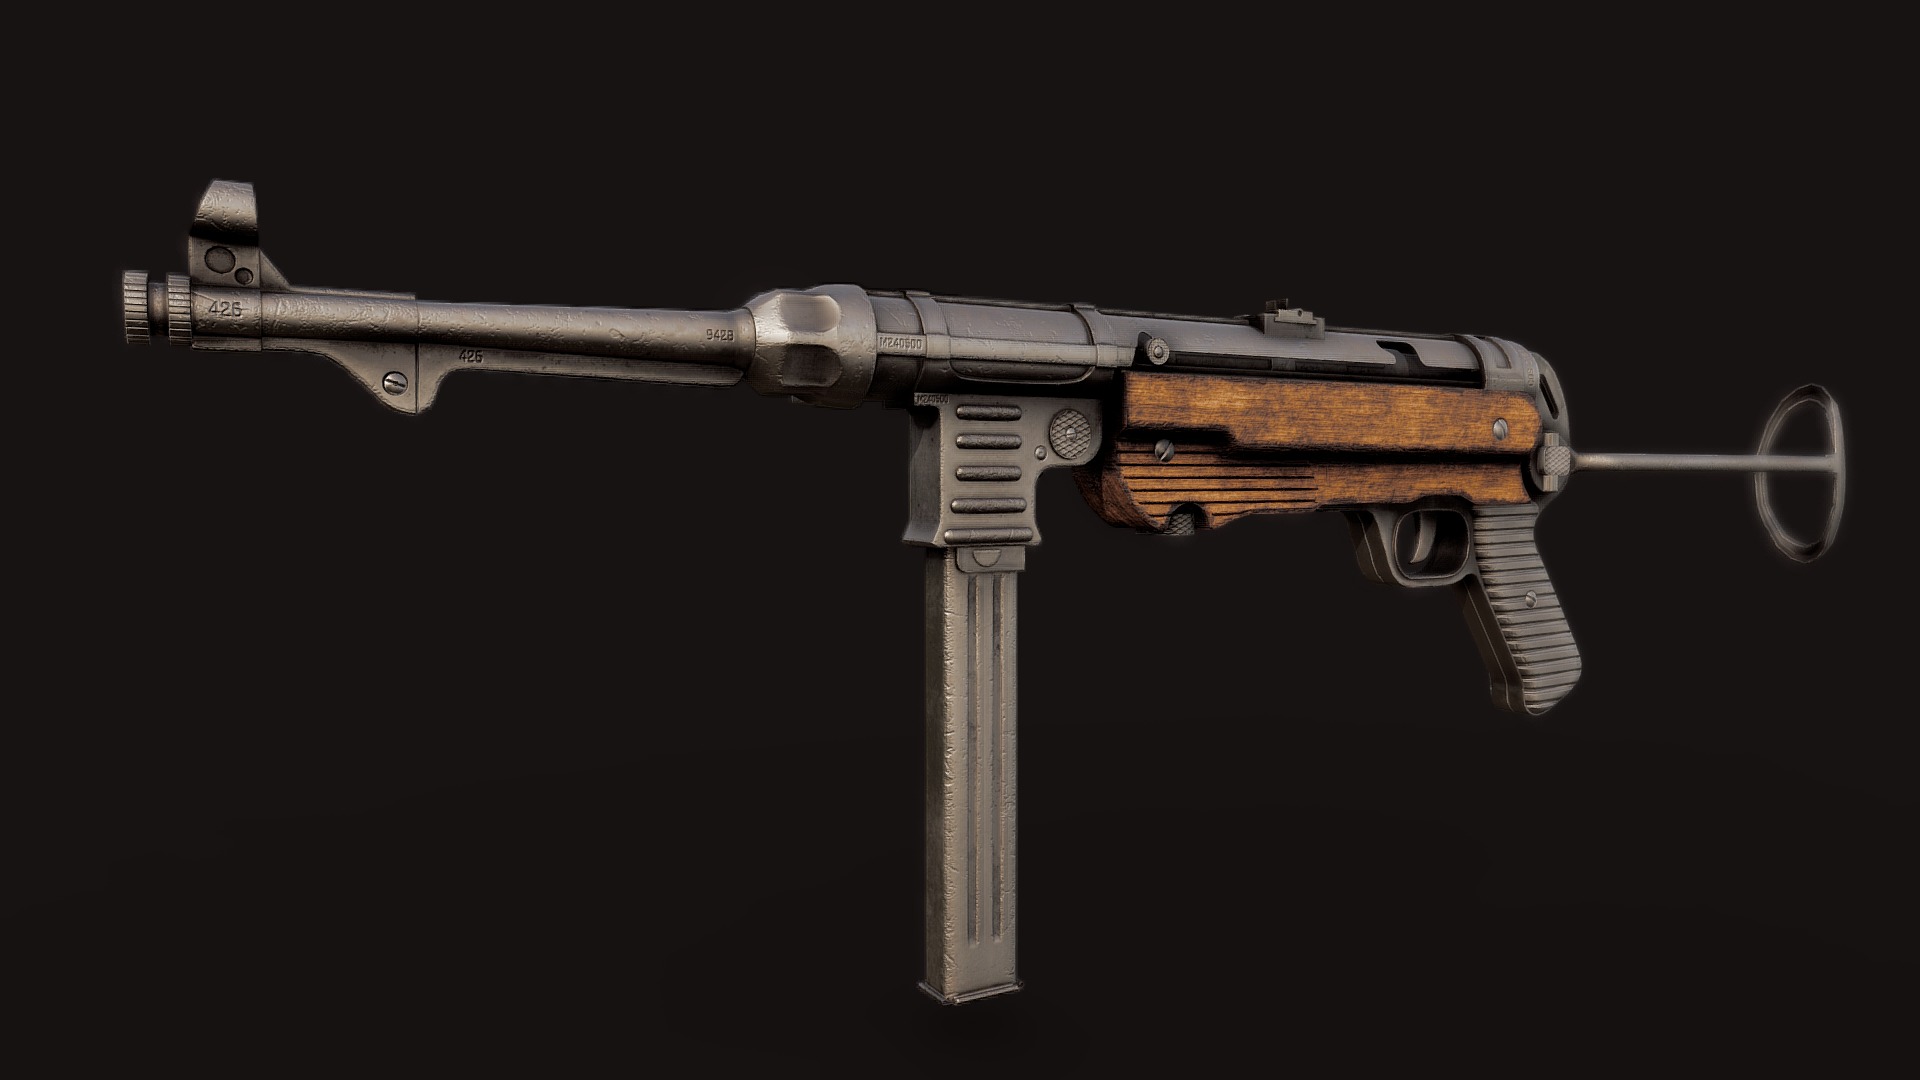 A World War II Machine Gun Pistol, MP40. This is one of my favourite guns from that era and decided to challenge myself to model this within a 12 hour period - MP40 (Machine Gun Pistol) - Downloadable - Buy Royalty Free 3D model by ElliotGriffiths (@ElliotGriffiths24) 3d model